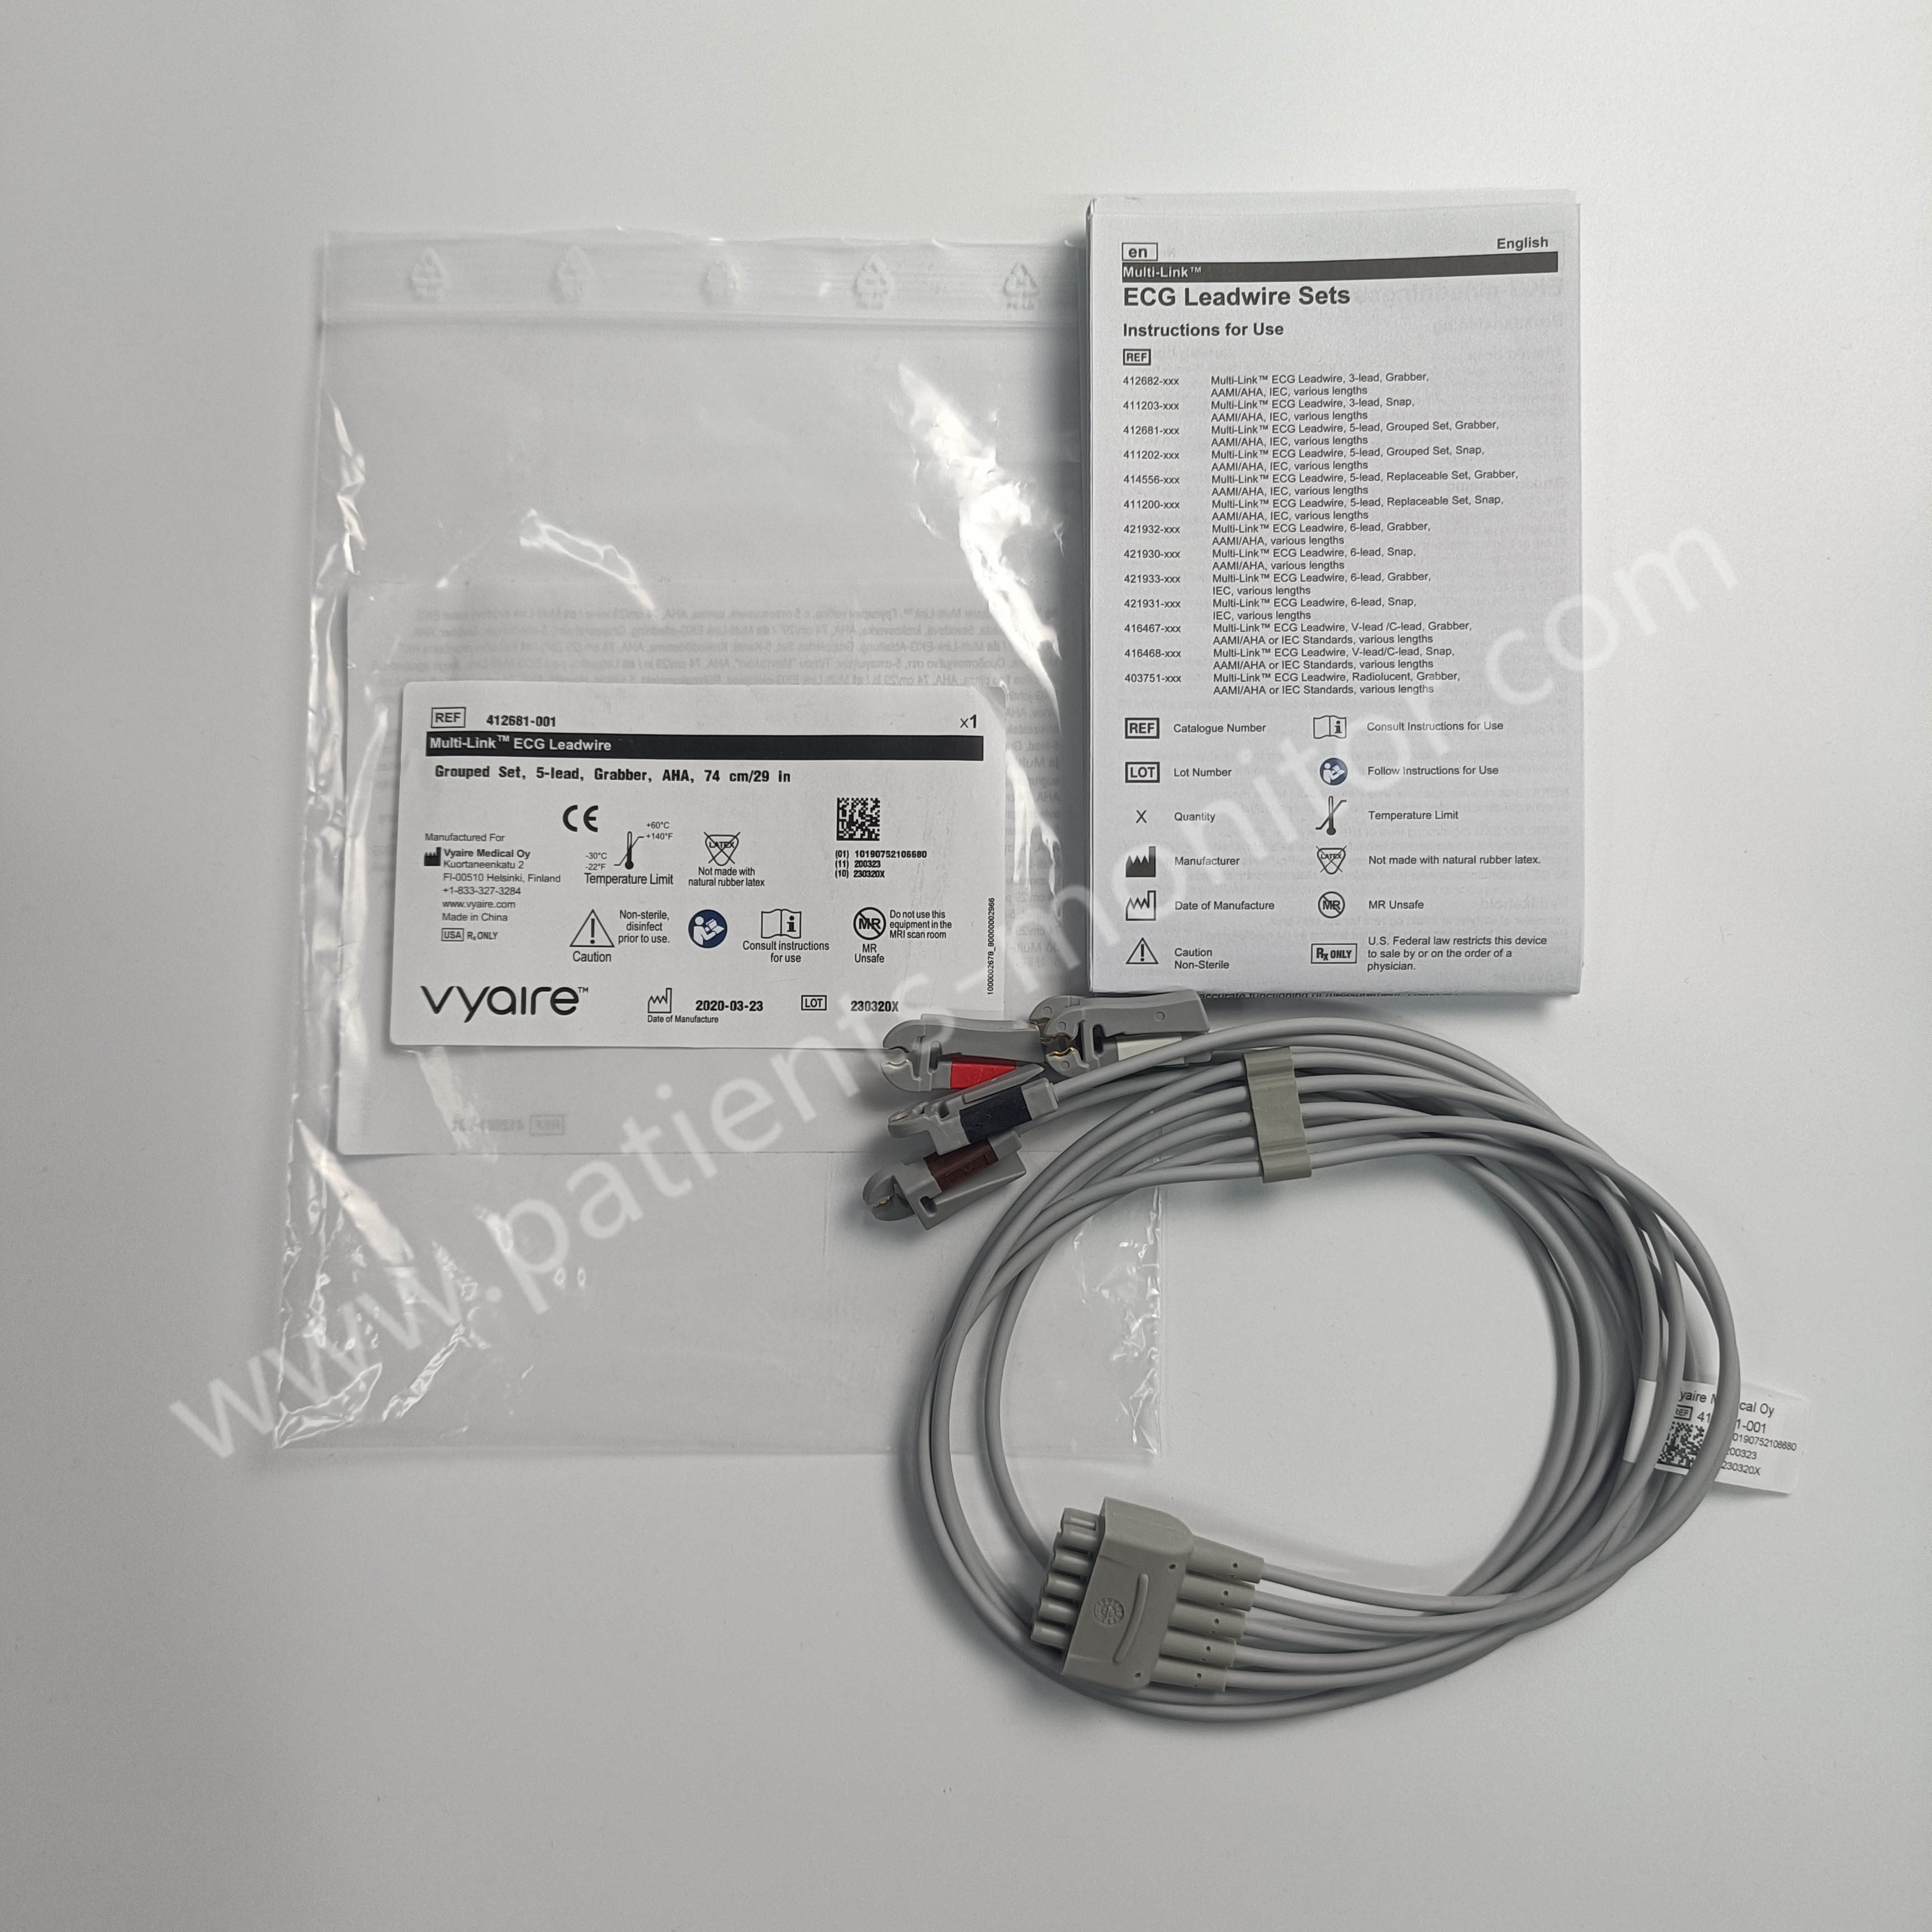  2106391-001 ECG Leadwire Grouped Set 5 Lead Grabber AHA 74cm 29 In  412681-001  414556-001 Manufactures